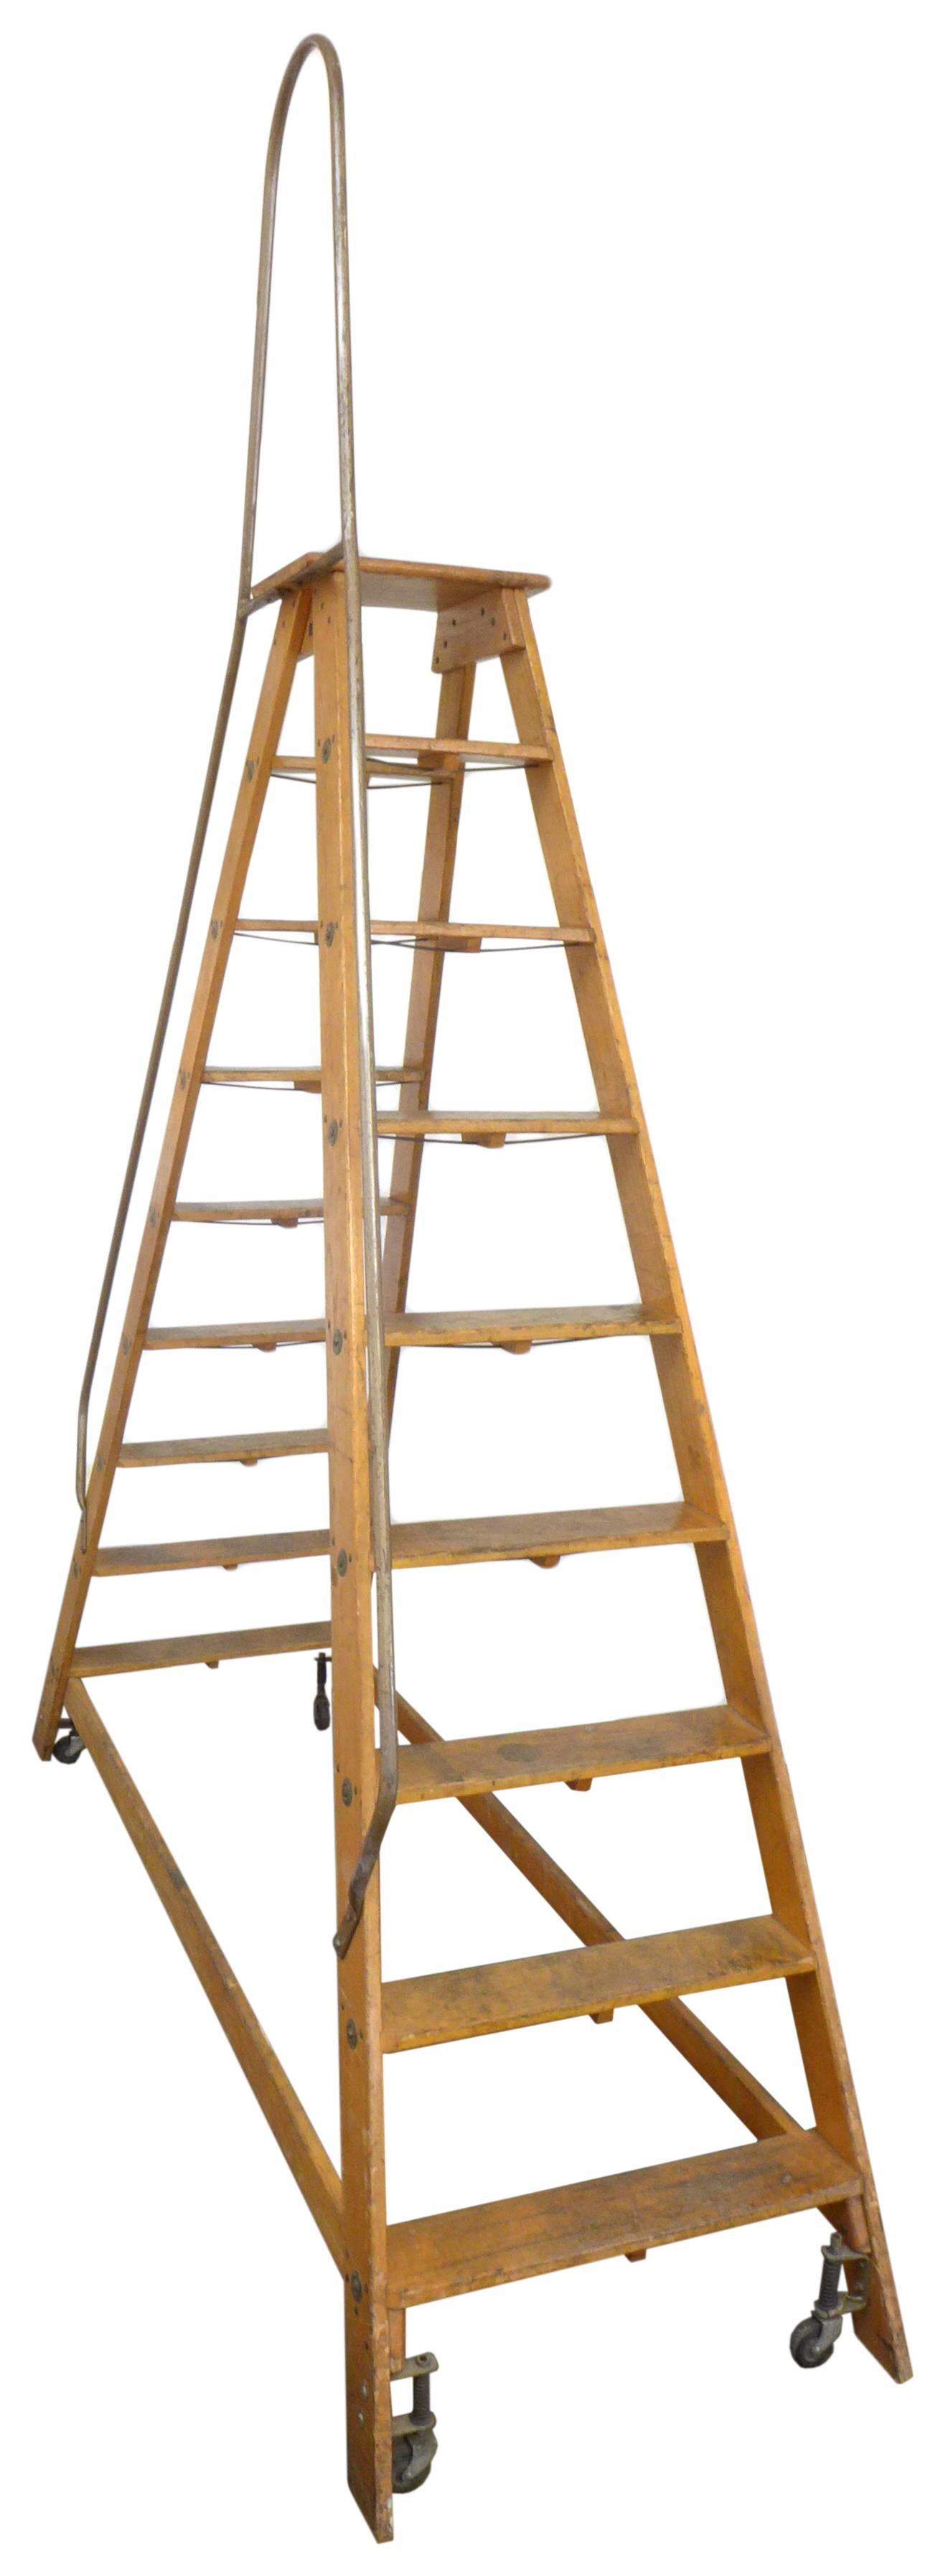 A monumental, double sided wood ladder. Towering at over 10' high, a simple and Classic utilitarian form in an impressive and unusual scale. Spring-loaded casters at the base make for easy movement. A tubular steel hand-rail accompanies one side of